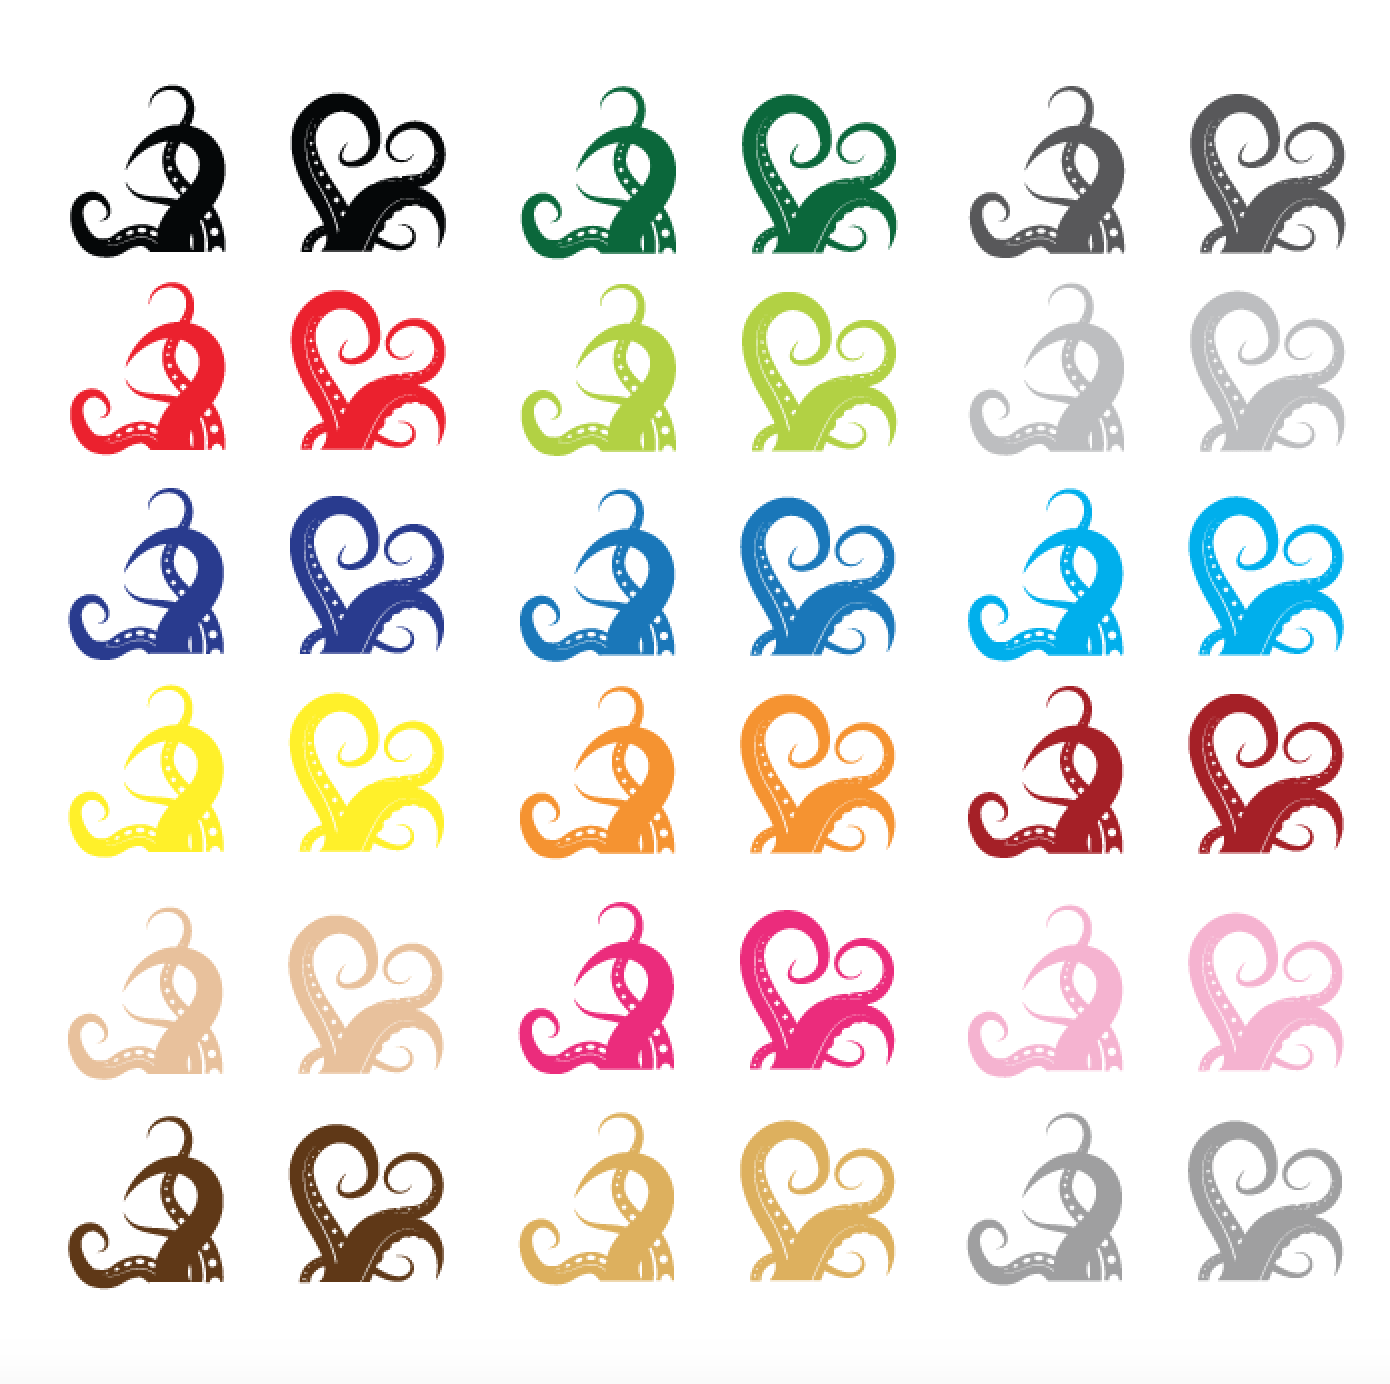 18 octopus tentacle decals in a white background showing the following colors: black, dark green, dark gray, red, light green, light gray, indigo, dark blue, light blue, yellow, orange, red, peach, dark pink, pink, brown, tan, and silver.